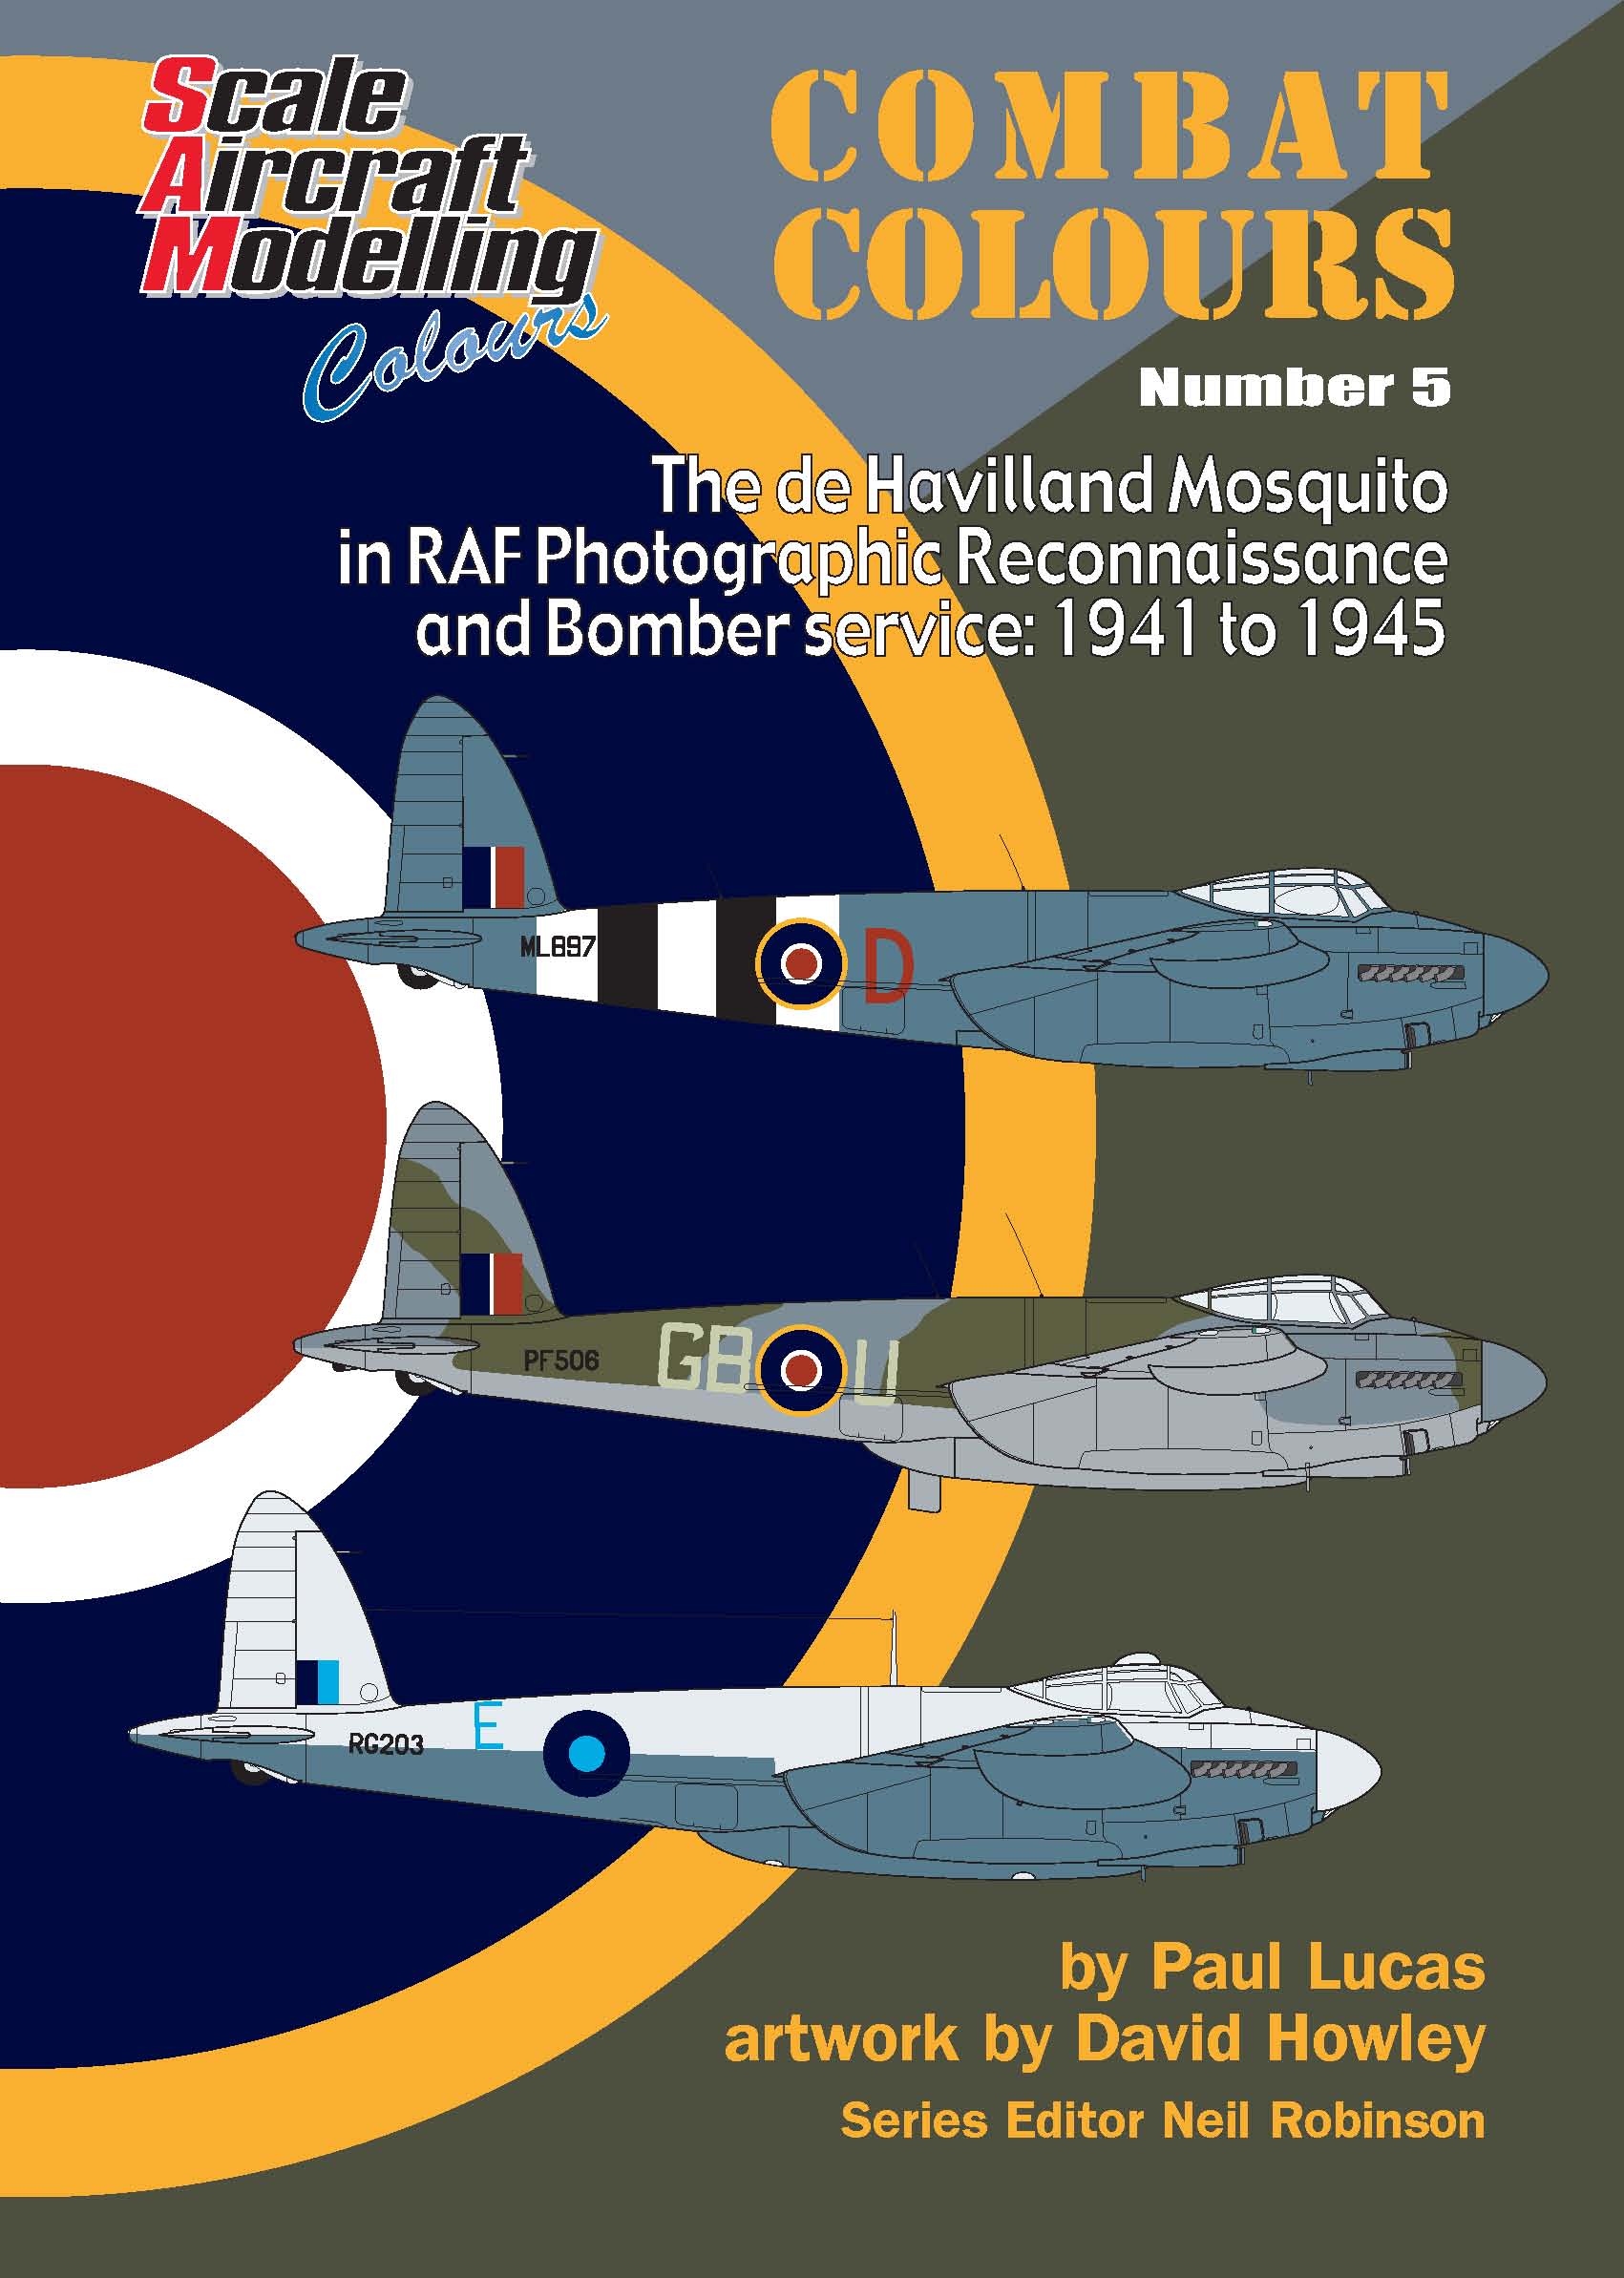 Guideline Publications Ltd Combat Colours no 5 The de Havilland Mosquito Combat Colours no 5 The de Havilland Mosquito in RAF Photographic Reconnaissance and Bomber service 1941to 1945 